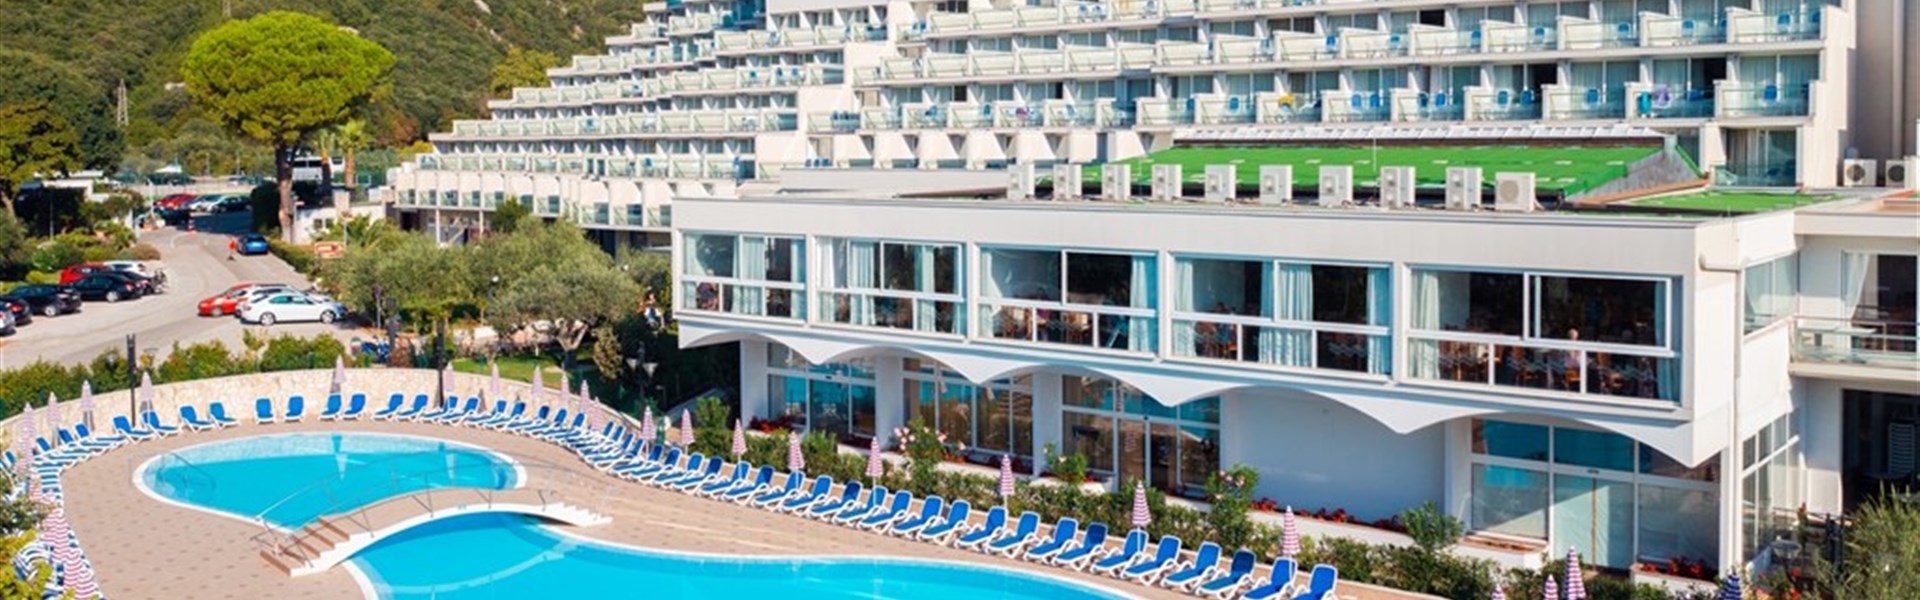 Marco Polo - Hotel Narcis - 